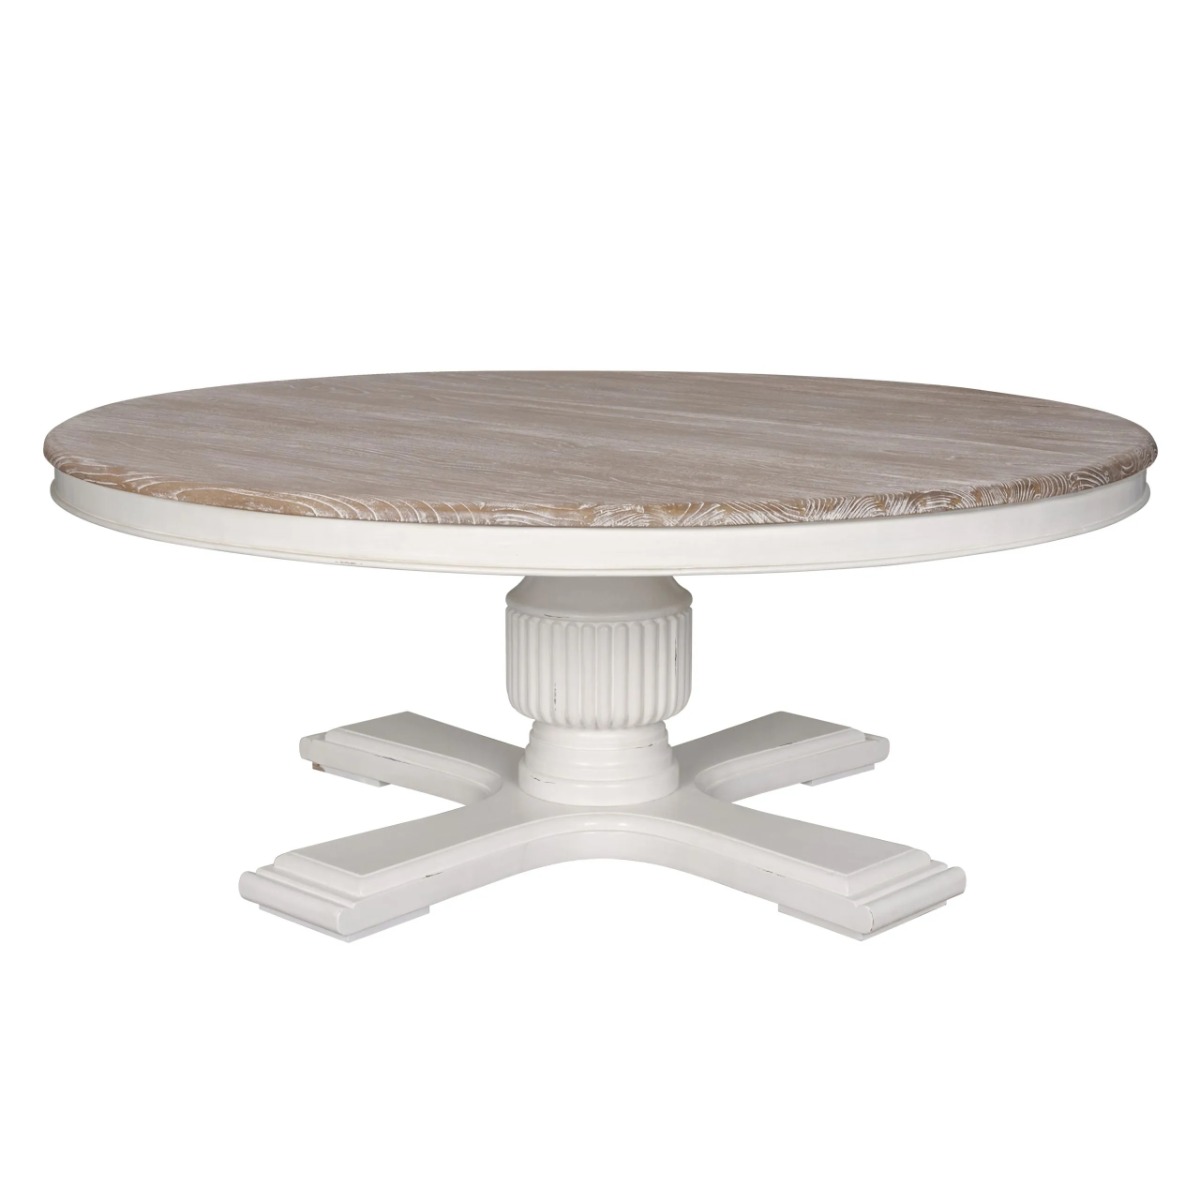 Sofia Round Dining Table in Oak Antique